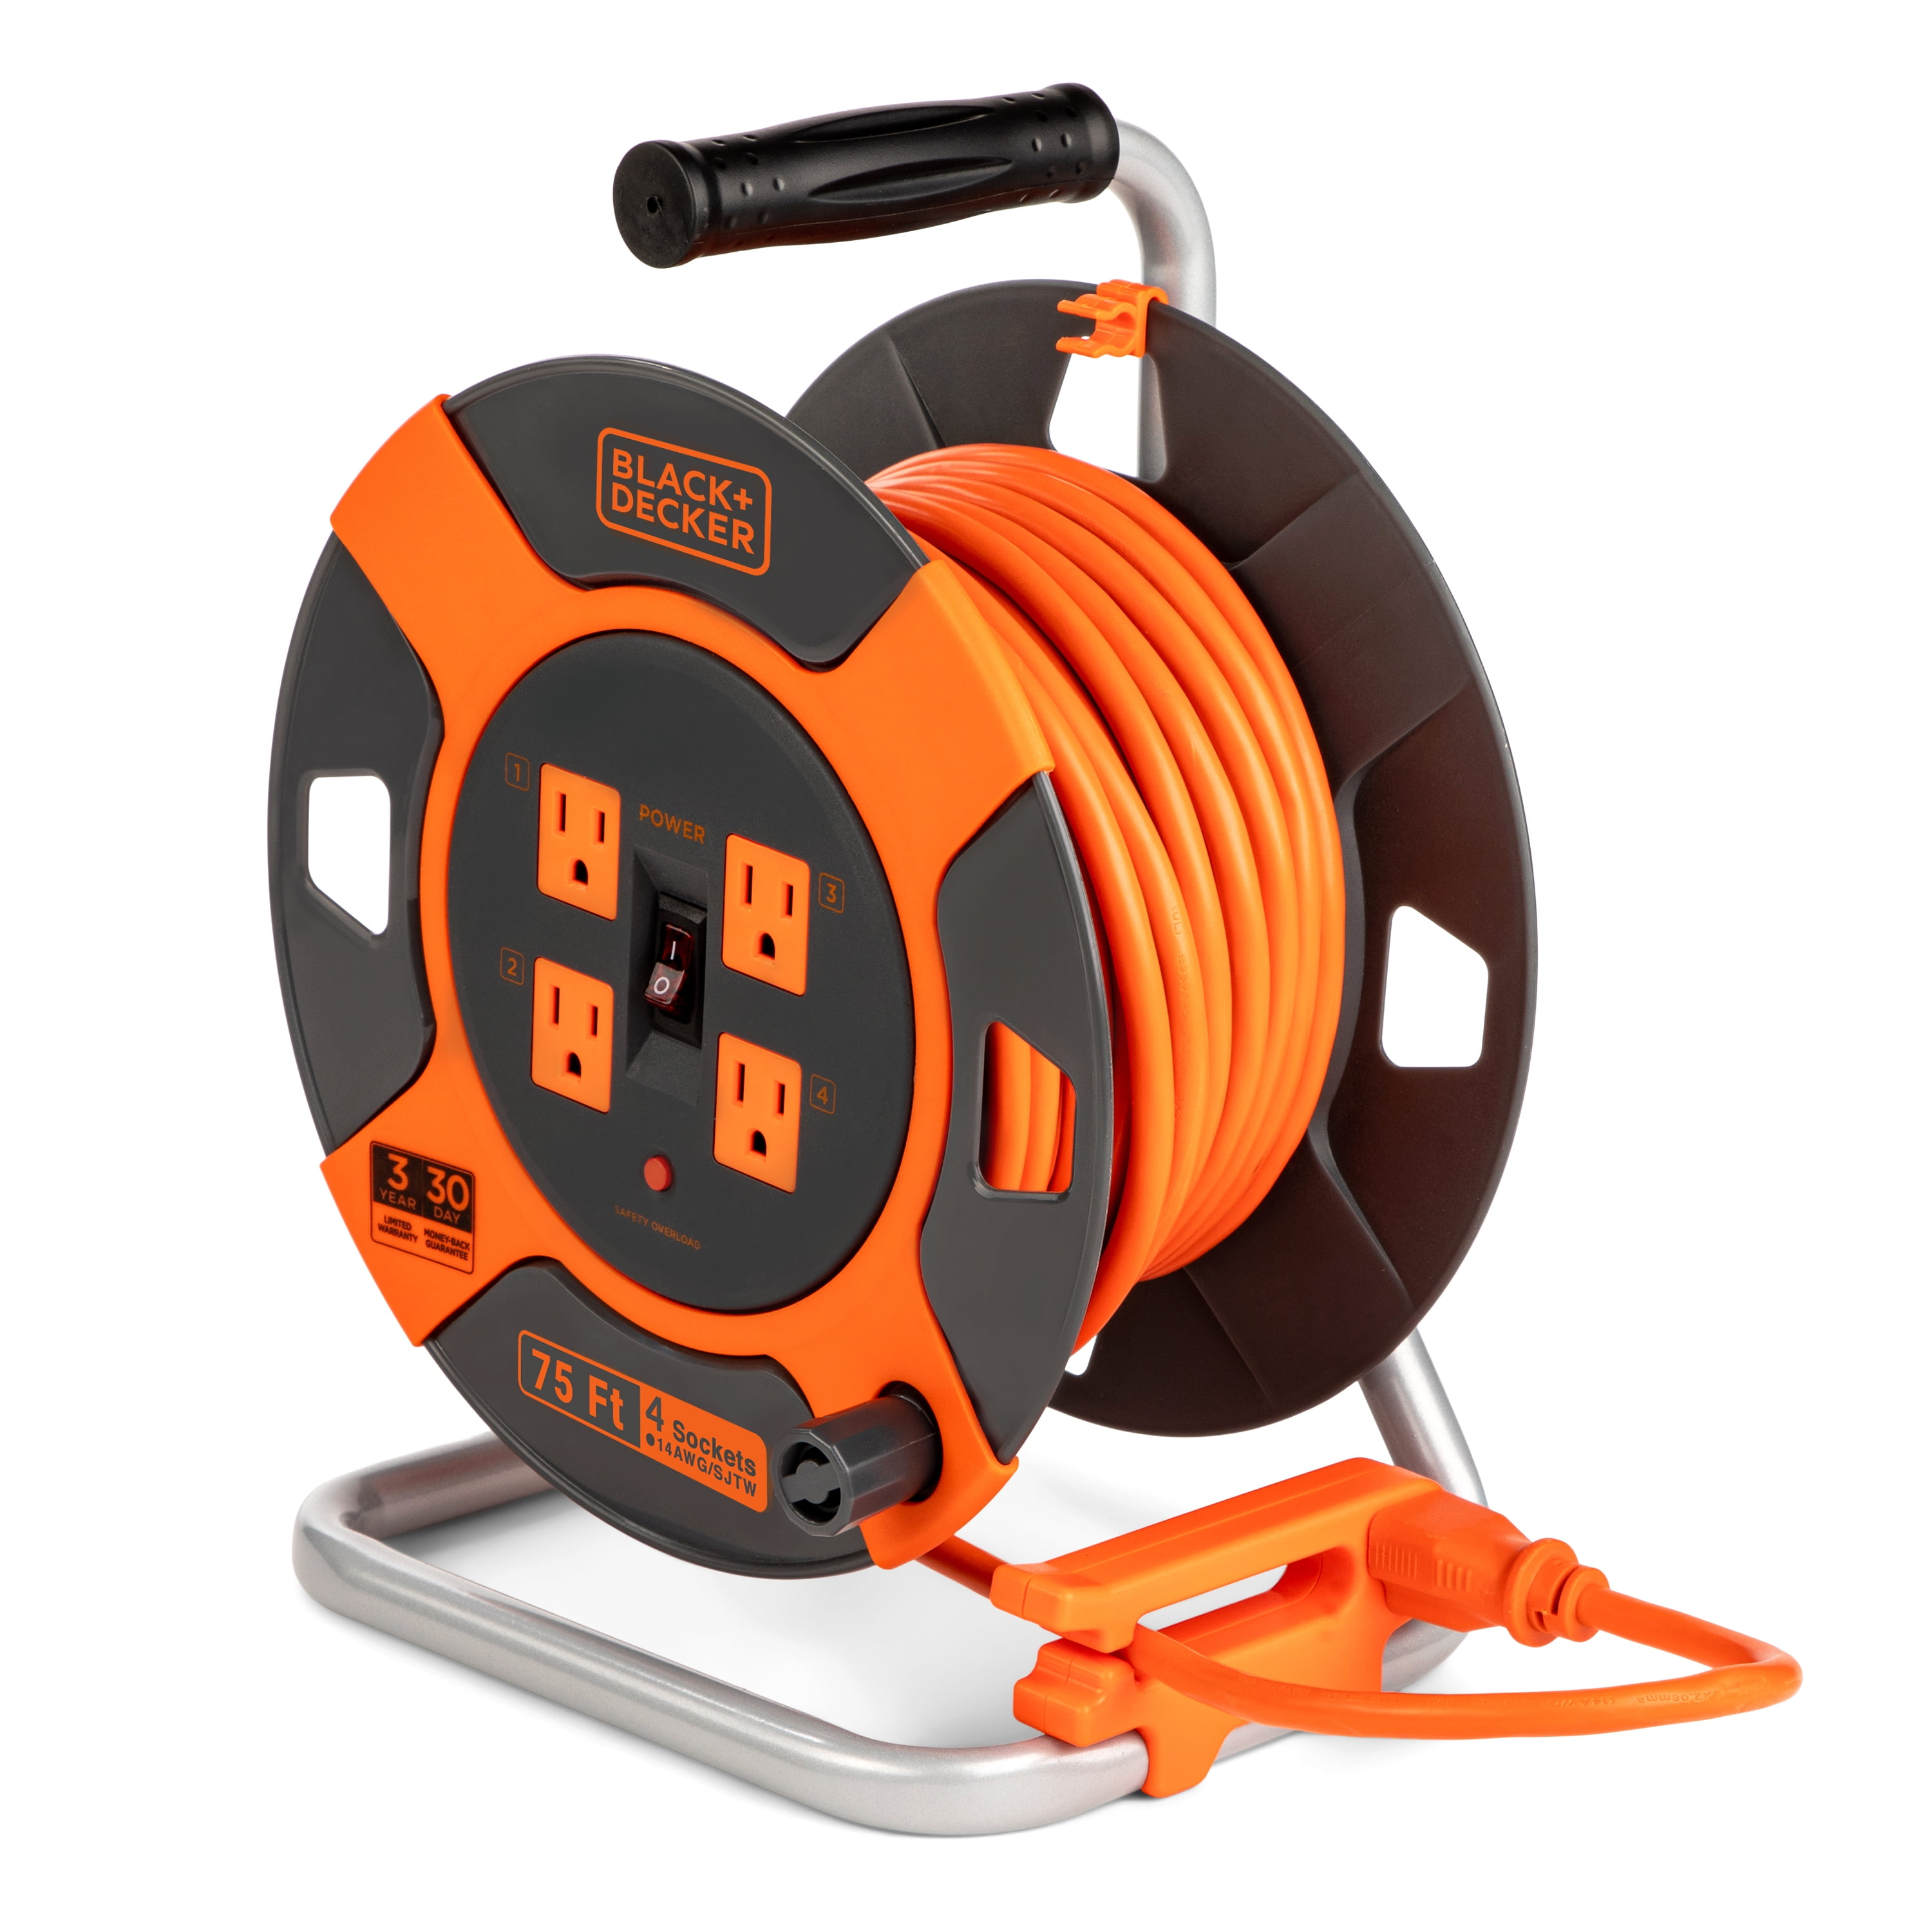 BLACK+DECKER Retractable Extension Cord, 75 ft with 4 Outlets - 14AWG SJTW Cable - Outdoor Power Cord Reel